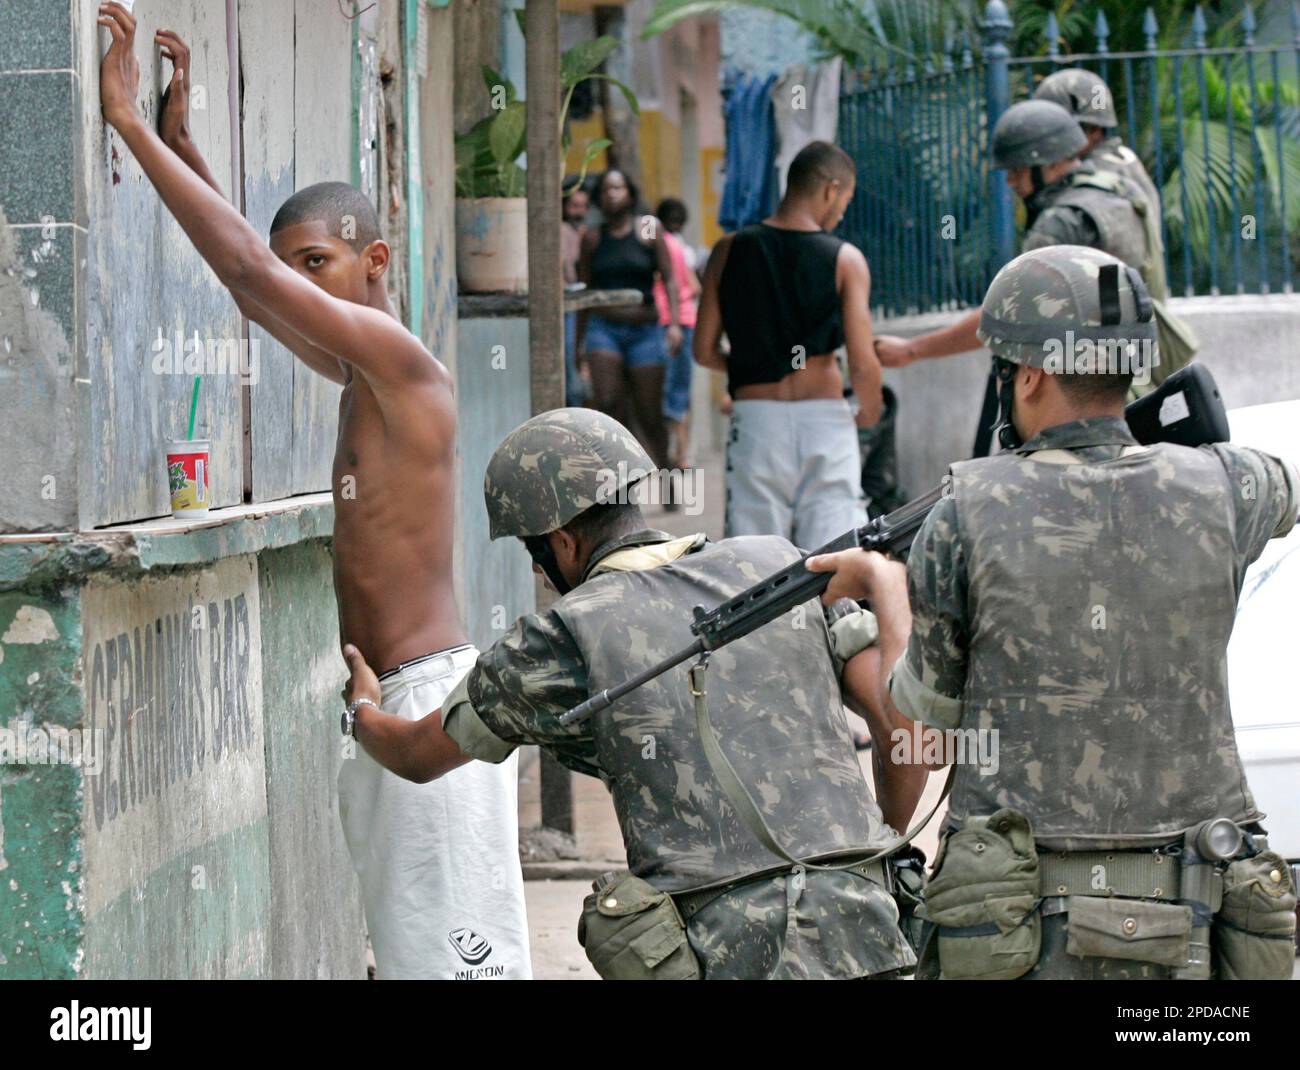 https://c8.alamy.com/comp/2PDACNE/brazilian-soldiers-search-a-man-looking-for-guns-at-the-entrance-of-the-mangueira-hillside-slum-in-rio-de-janeiro-brazil-on-wednesday-march-8-2006-army-troops-backed-by-tanks-invaded-a-hillside-slum-known-for-its-carnival-samba-in-a-widening-search-for-rifles-stolen-from-an-army-barracks-ap-photosilvia-izquierdo-2PDACNE.jpg